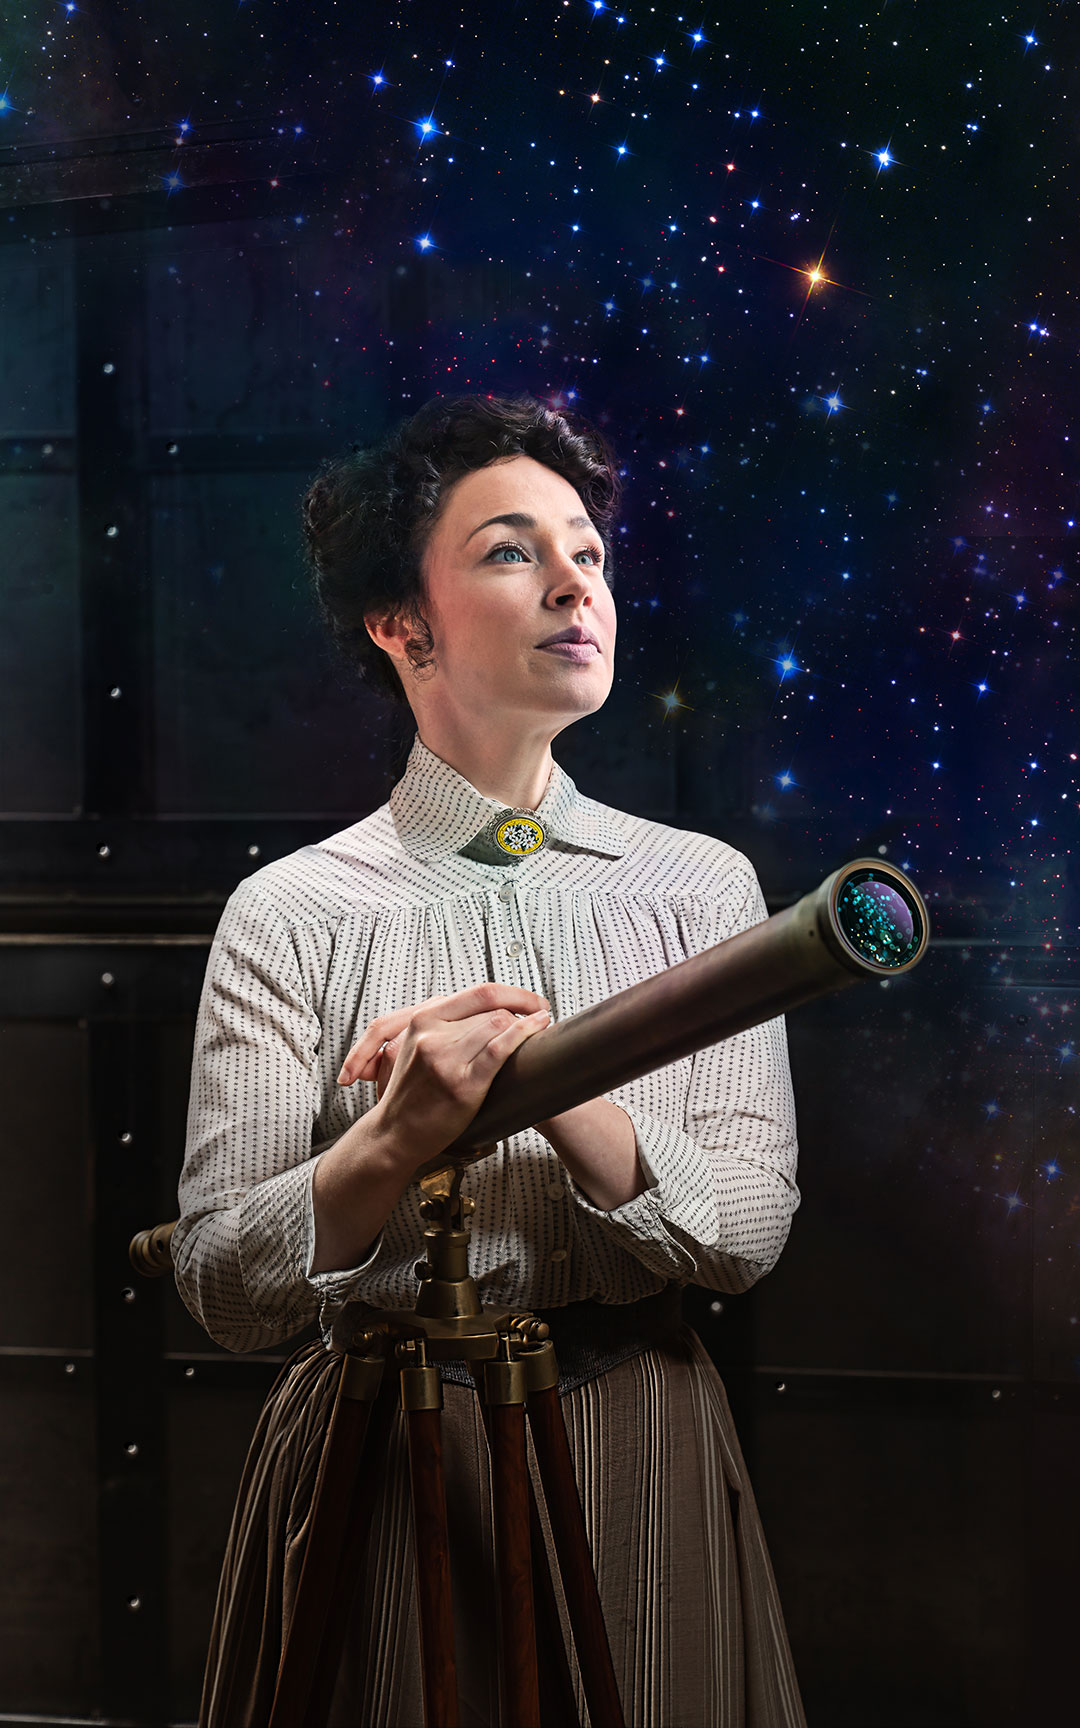 A woman wearing a white, collared Victorian blouse and high-waisted skirt stands behind a telescope looking wistfully into the sky.